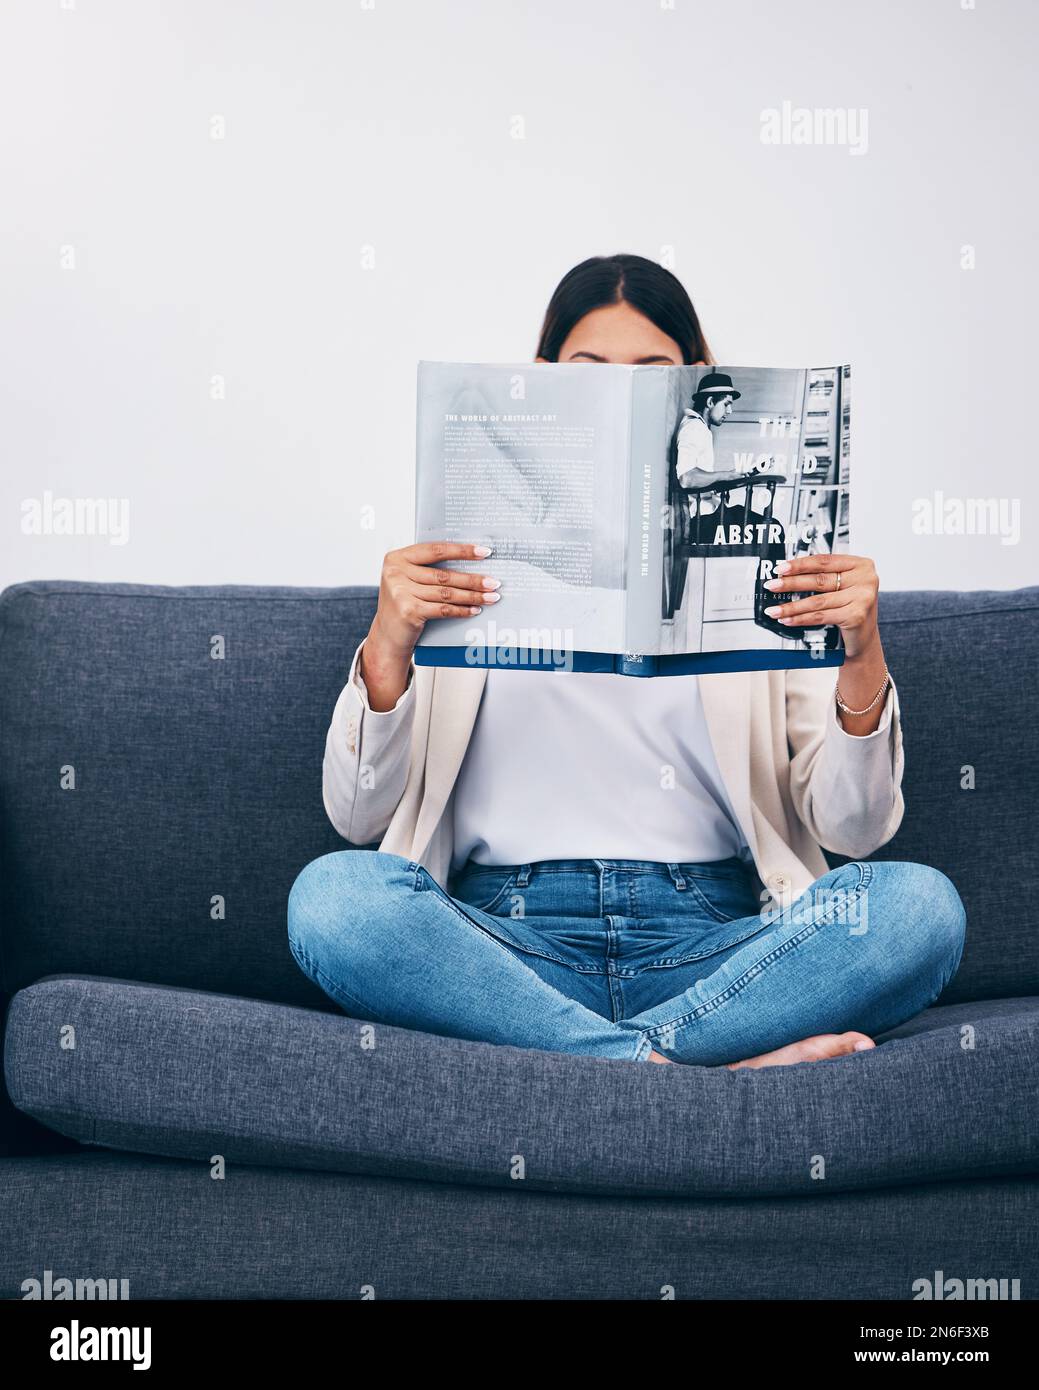 Relax, magazine or woman reading newspaper articles on sofa at home for information or story updates. Press, focus or person relaxing and studying Stock Photo